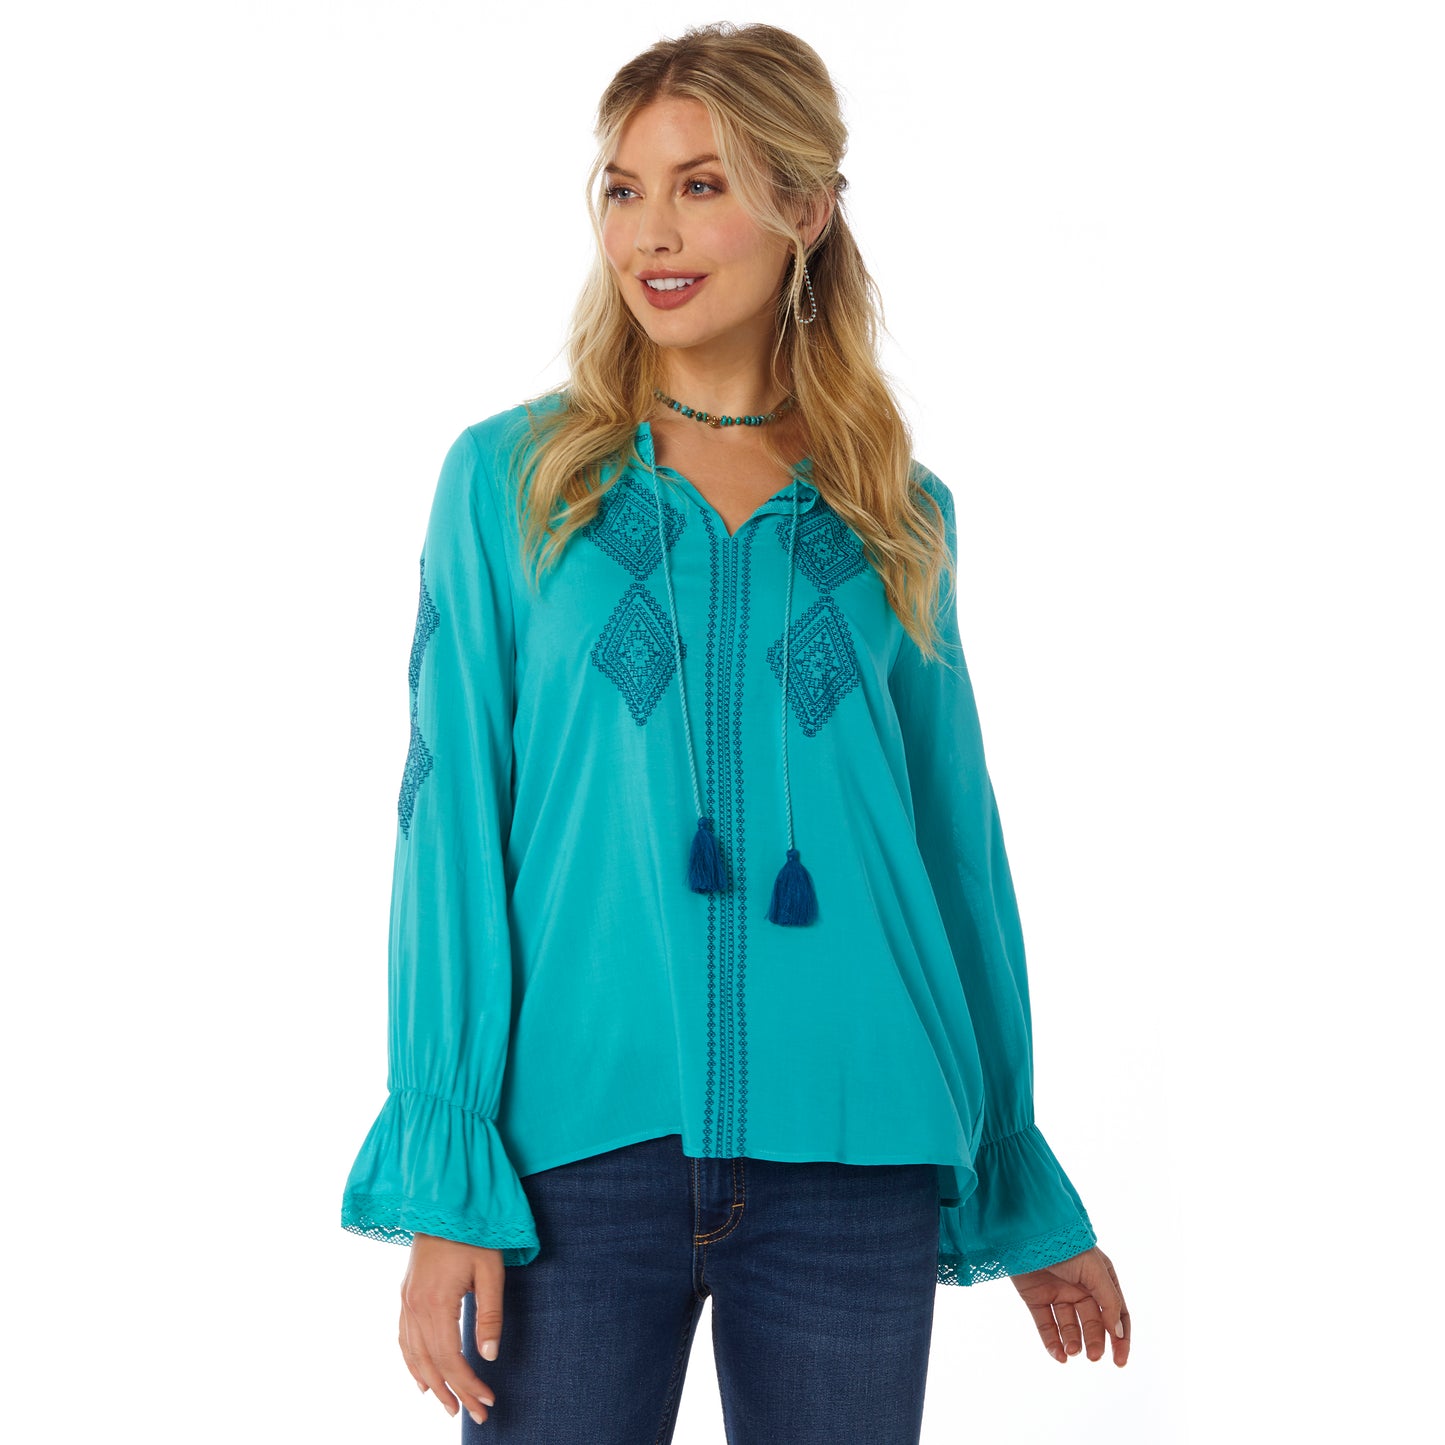 Wrangler Ladies Embroidered L/S Peasant Top - Teal - LW7530Q - On Sale